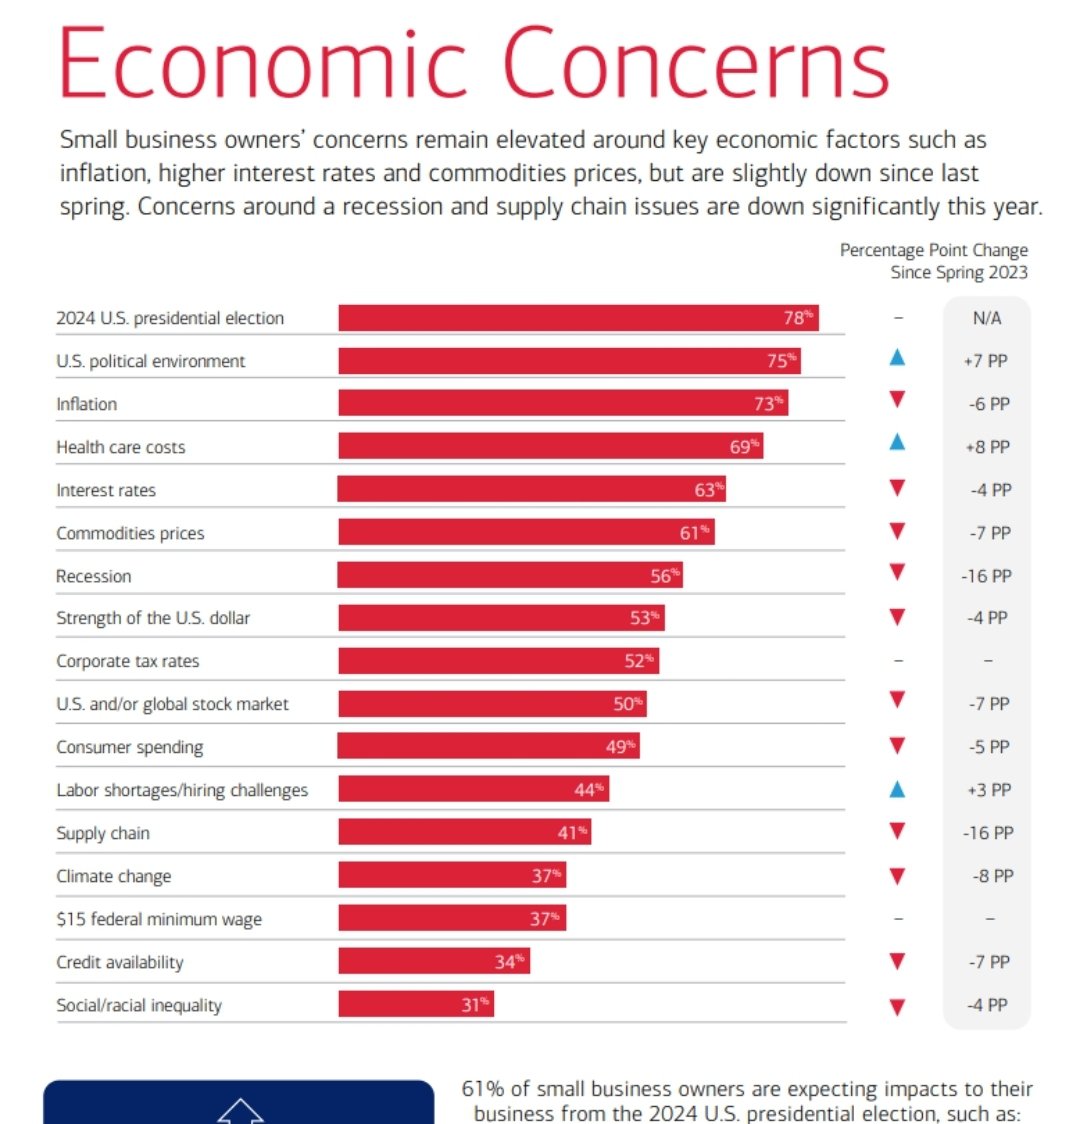 Small business owners' top concerns